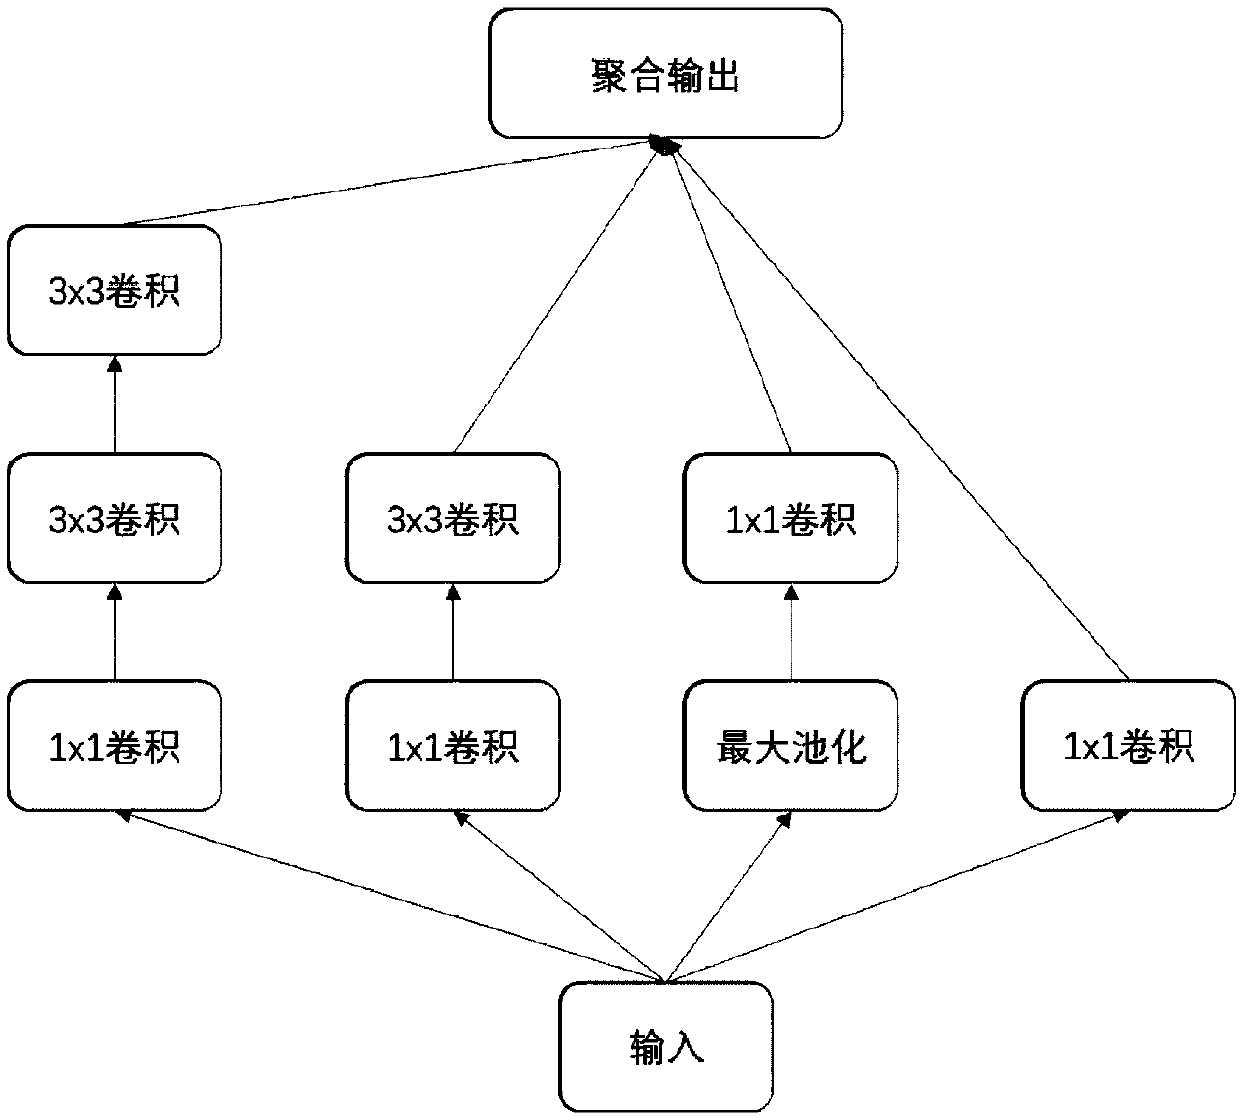 Seal script recognition method and system based on Incep-CapsNet network